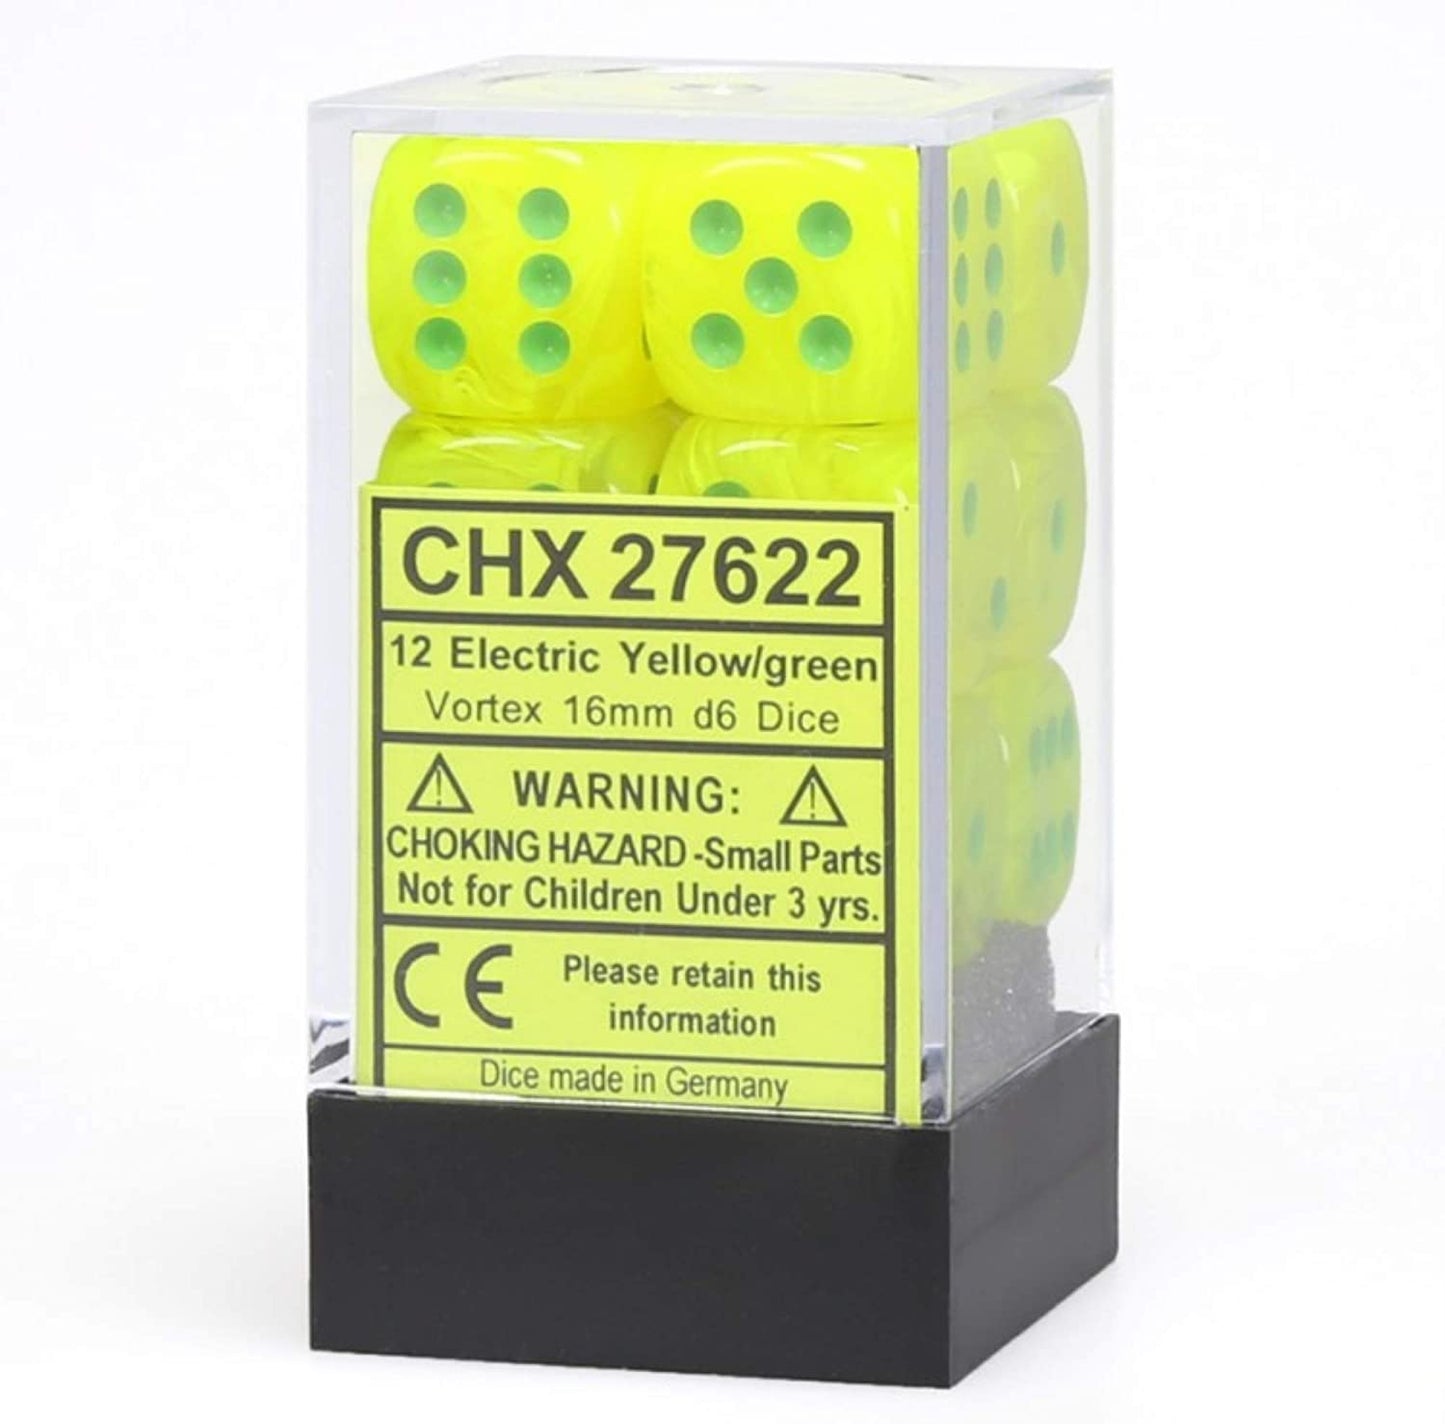 Chessex Dice: D6 Block 16mm - Vortex - Electric Yellow with Green (CHX 27622) - Gamescape